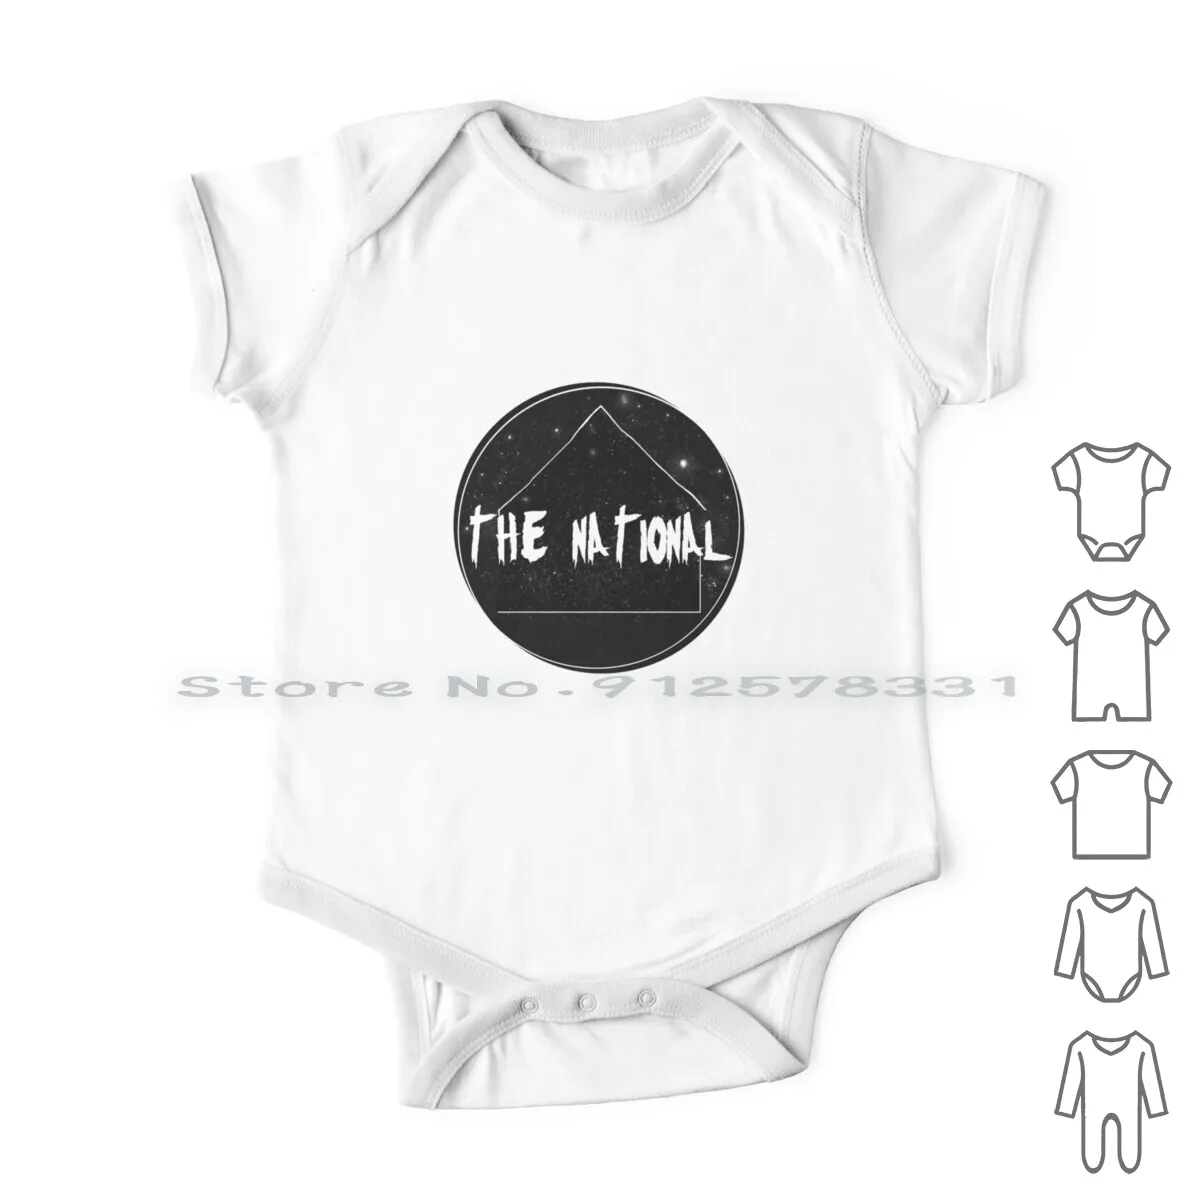 

The National ( Band ) ( Sleep Well Beast )-Galaxy Swb Newborn Baby Clothes Rompers Cotton Jumpsuits Ntl Ntnl Band Music Indie